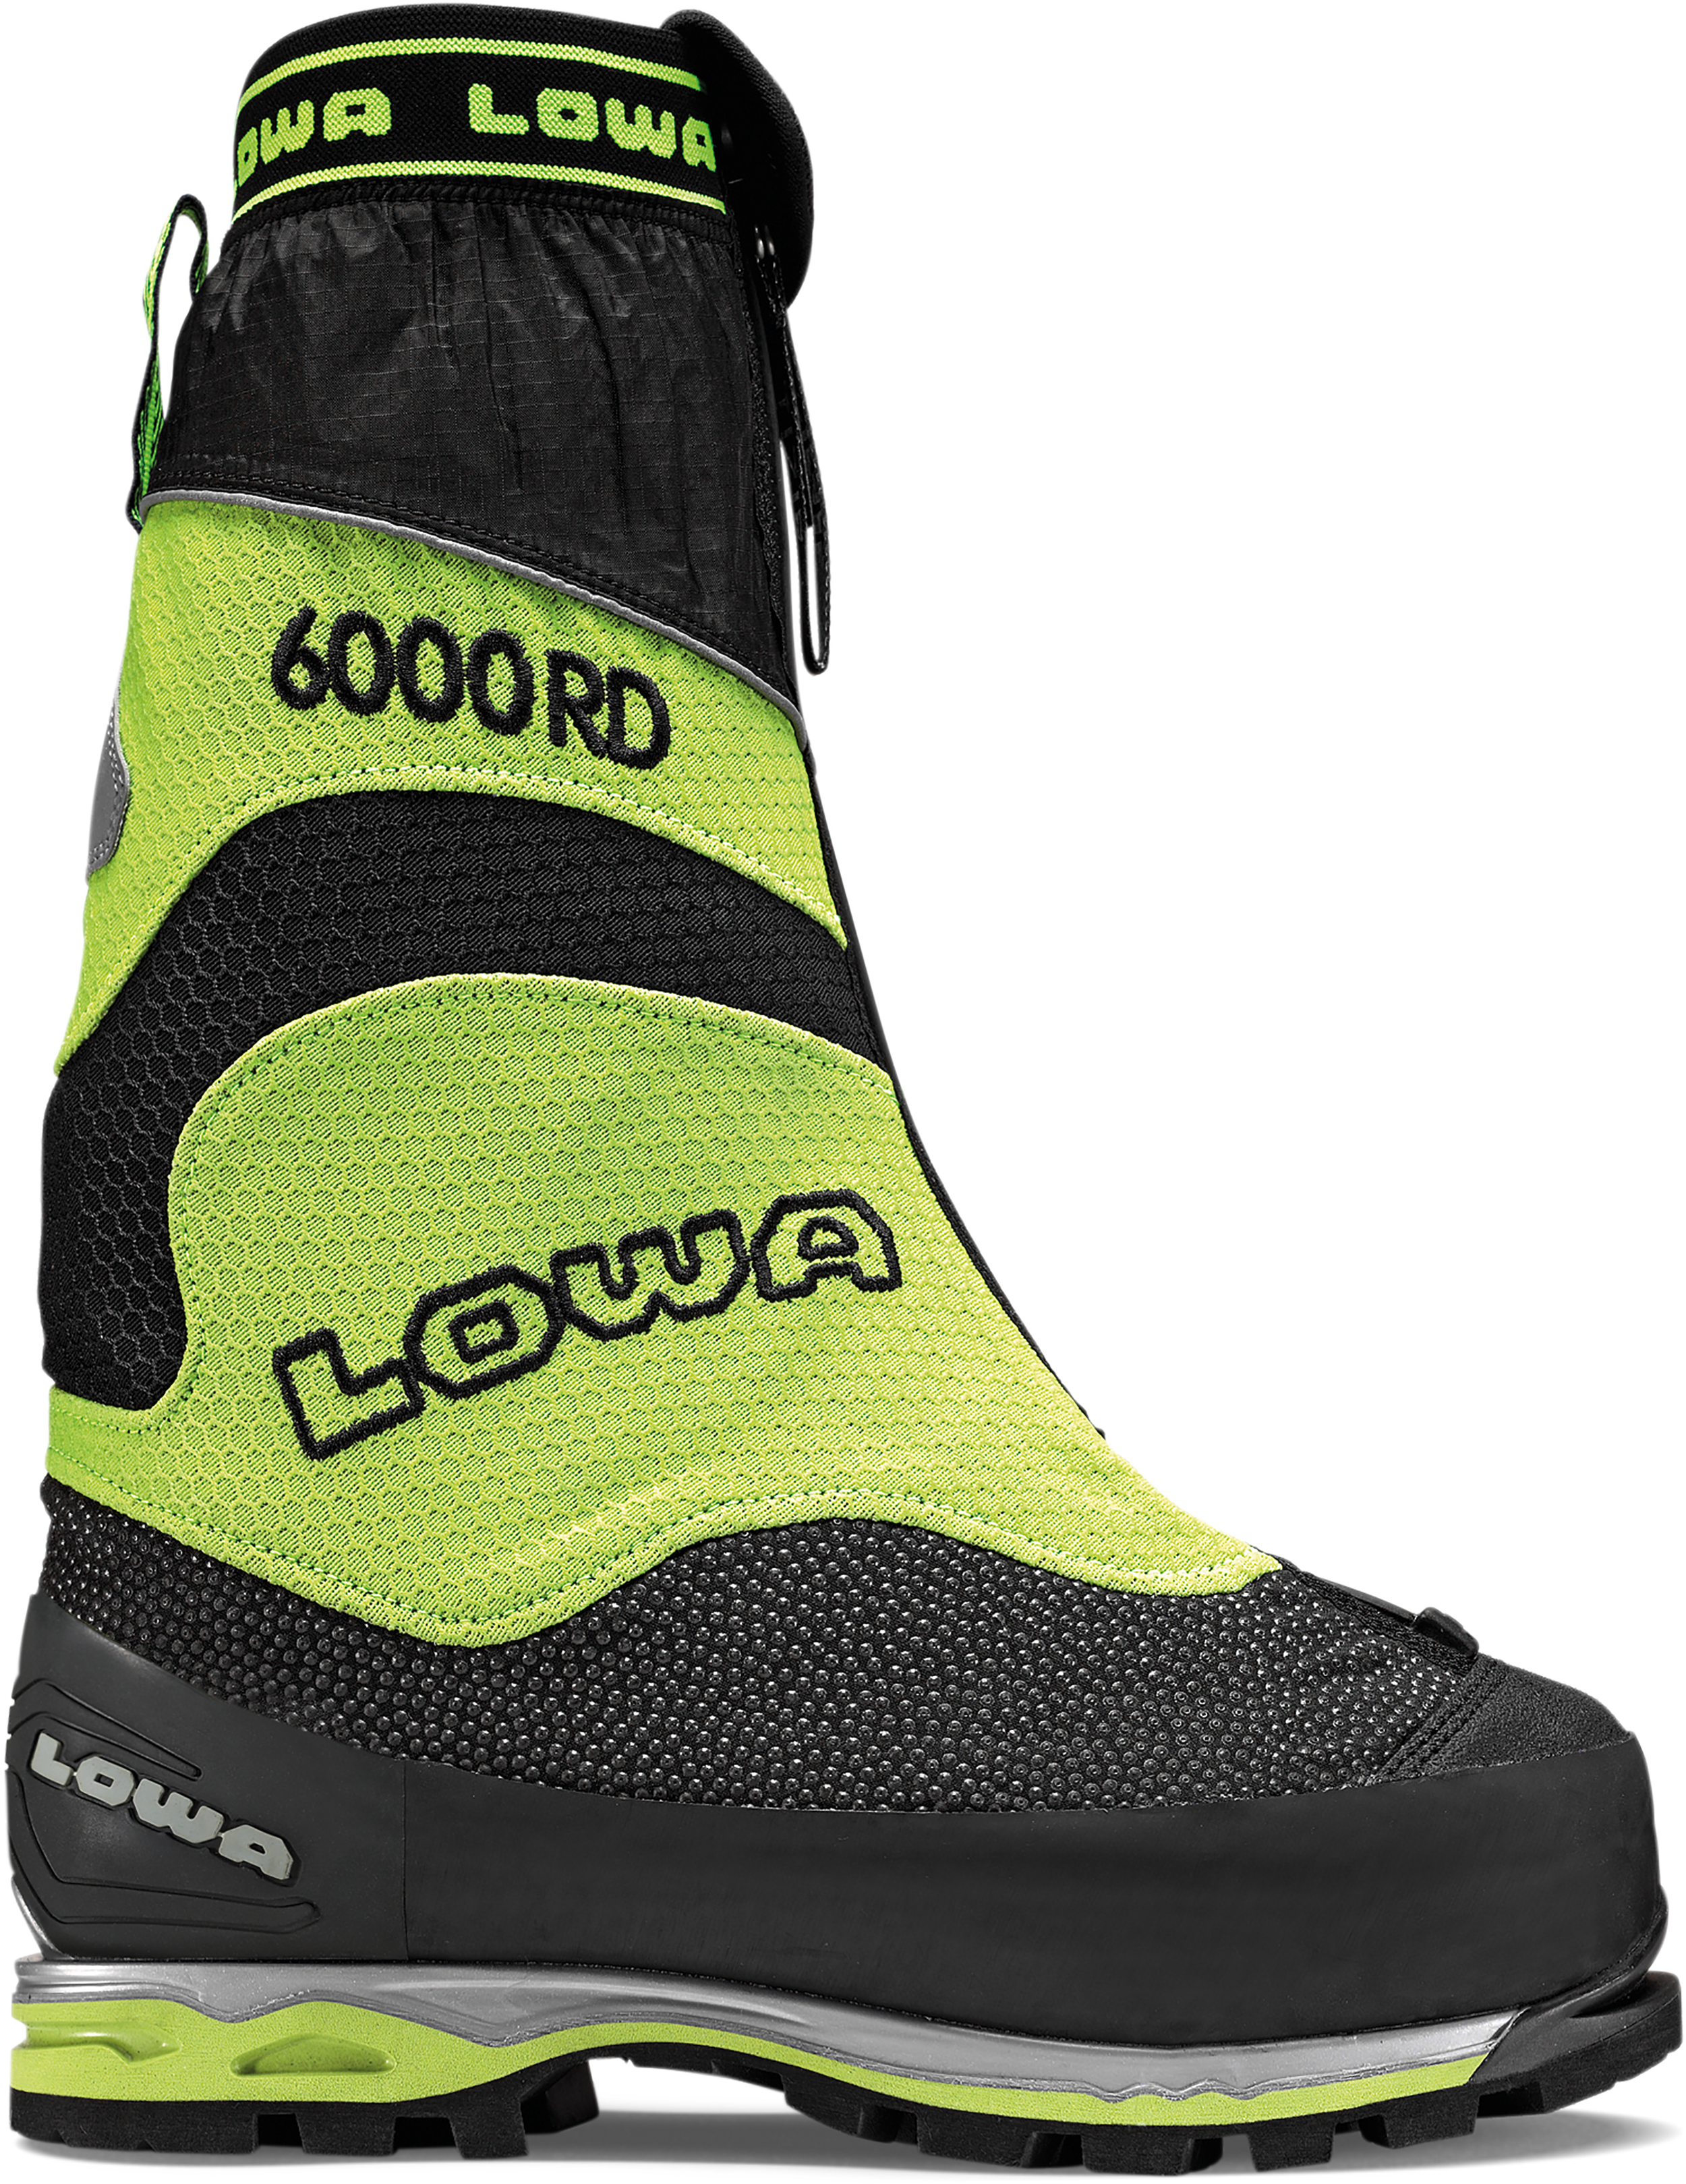 tempo Amuseren Koe EXPEDITION 6000 EVO RD: MOUNTAINEERING shoes for women | LOWA GR